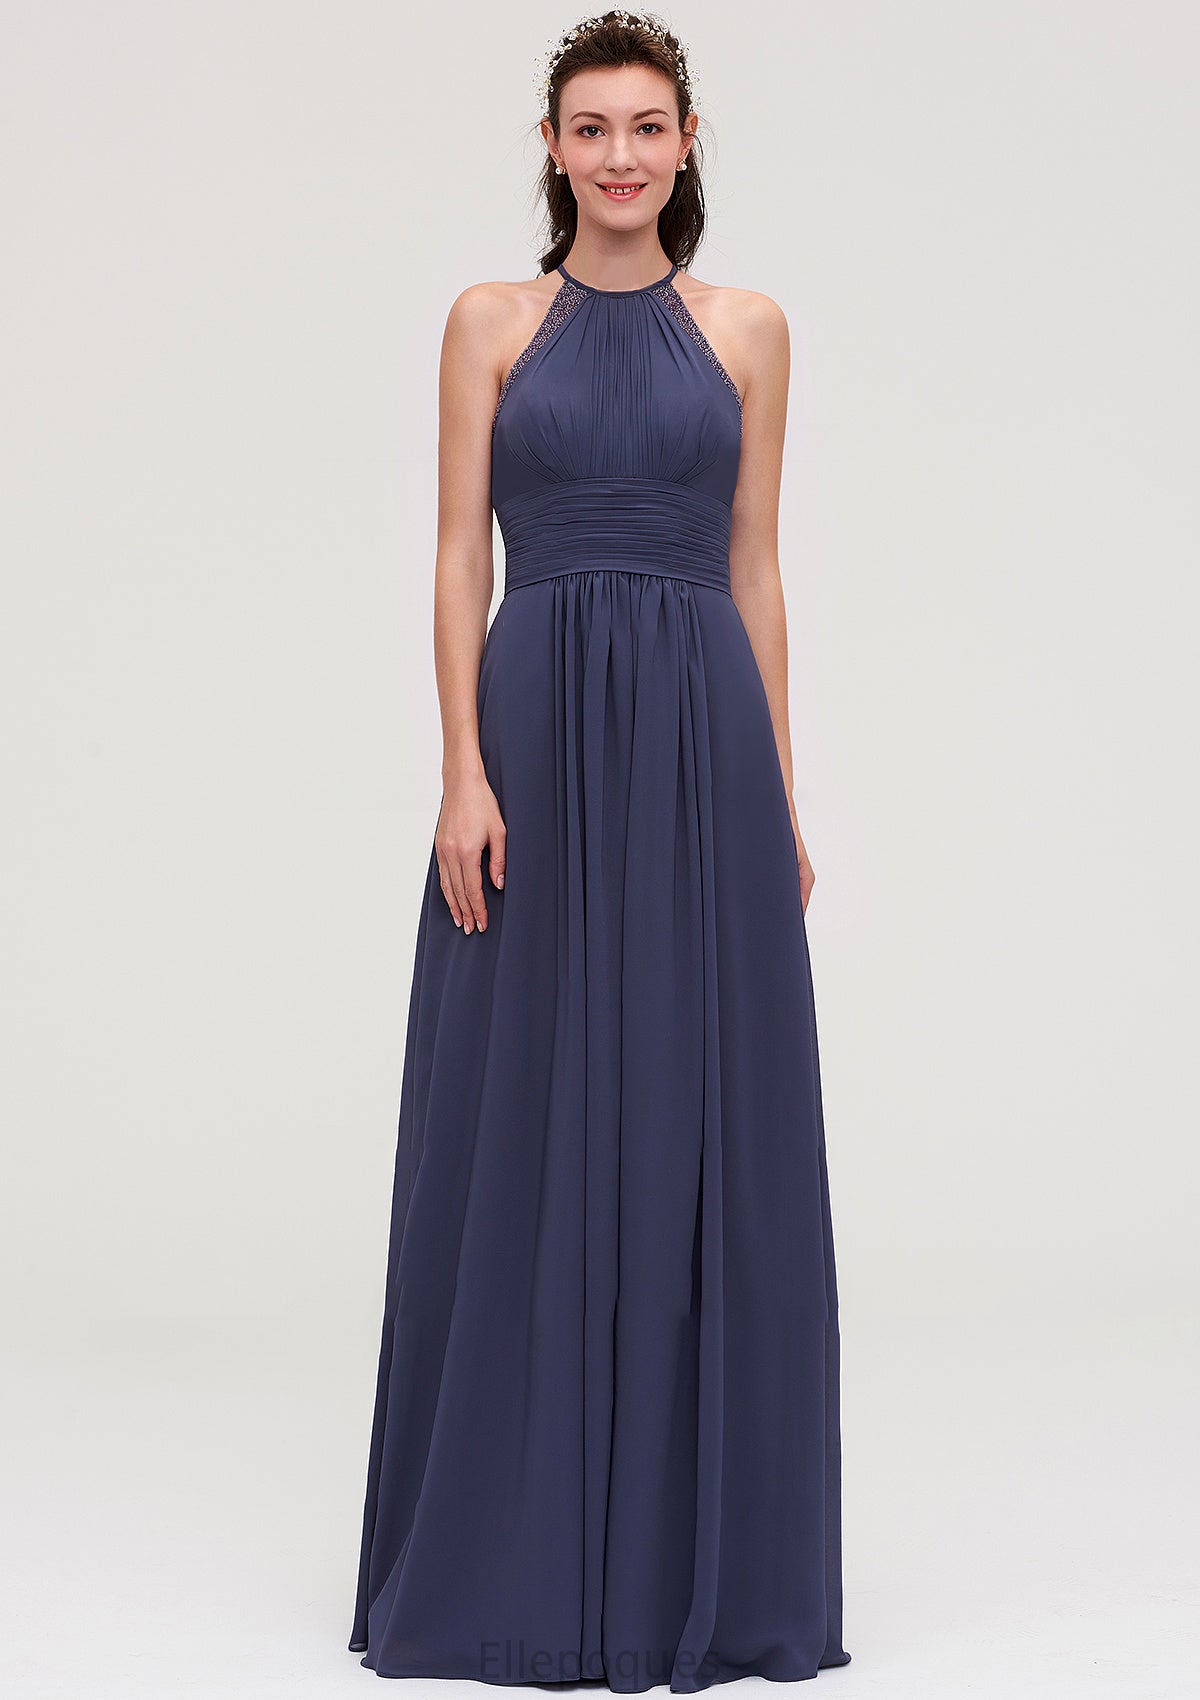 Scoop Neck Sleeveless A-line/Princess Chiffon Long/Floor-Length Bridesmaid Dresseses With Pleated Appliqued Shania HOP0025439